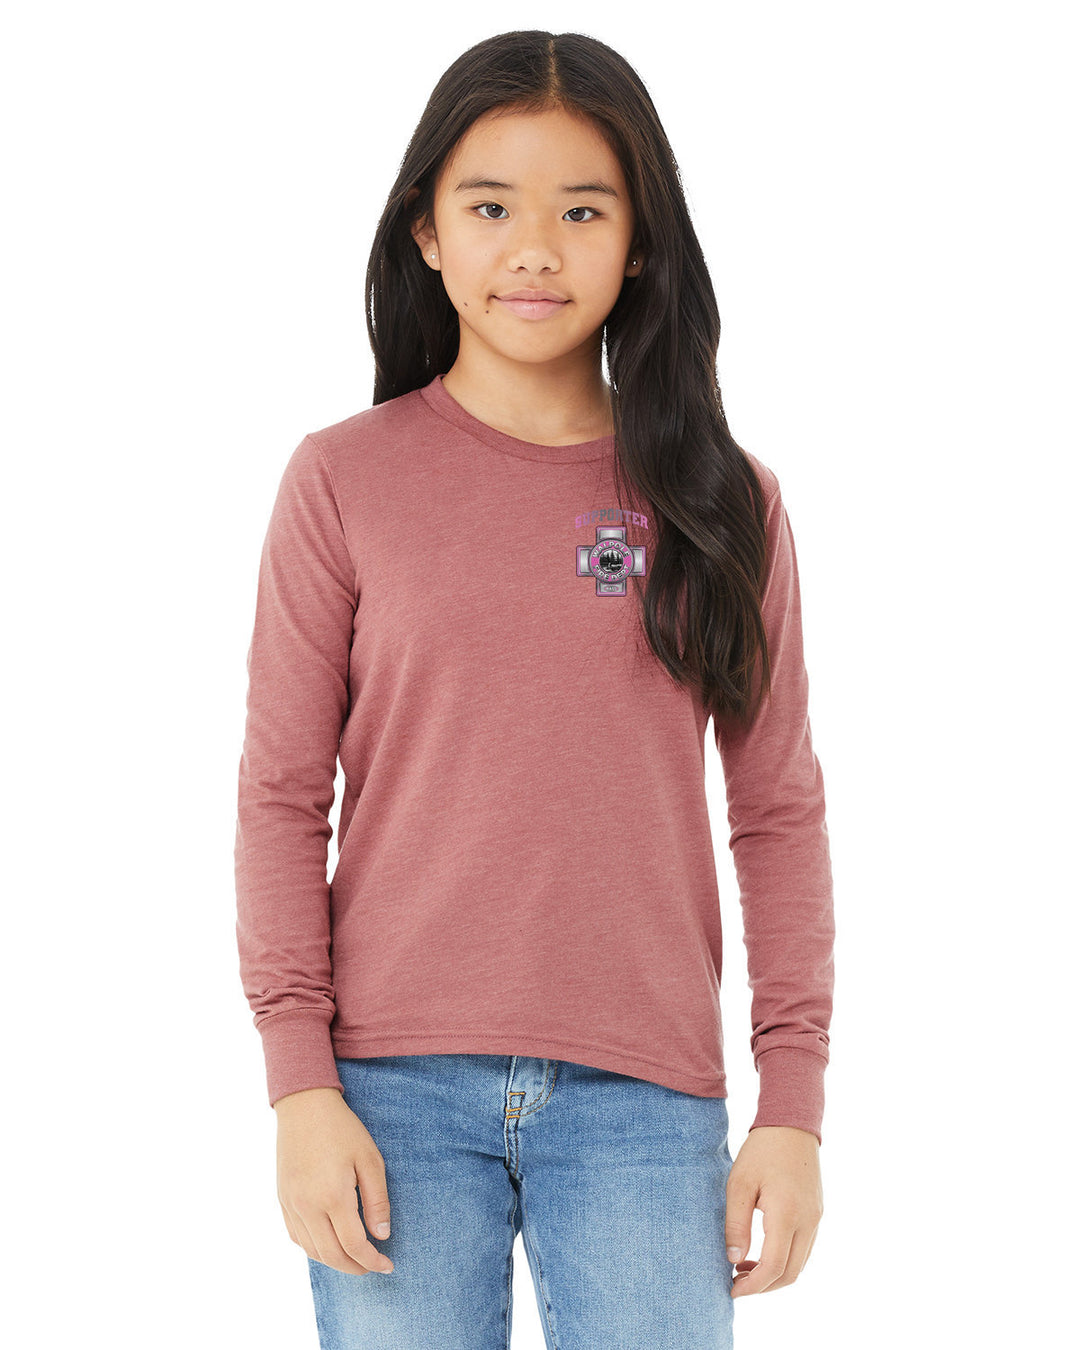 Walpole FD Breast Cancer Awareness Youth Jersey Long-Sleeve T-Shirt (3501Y)